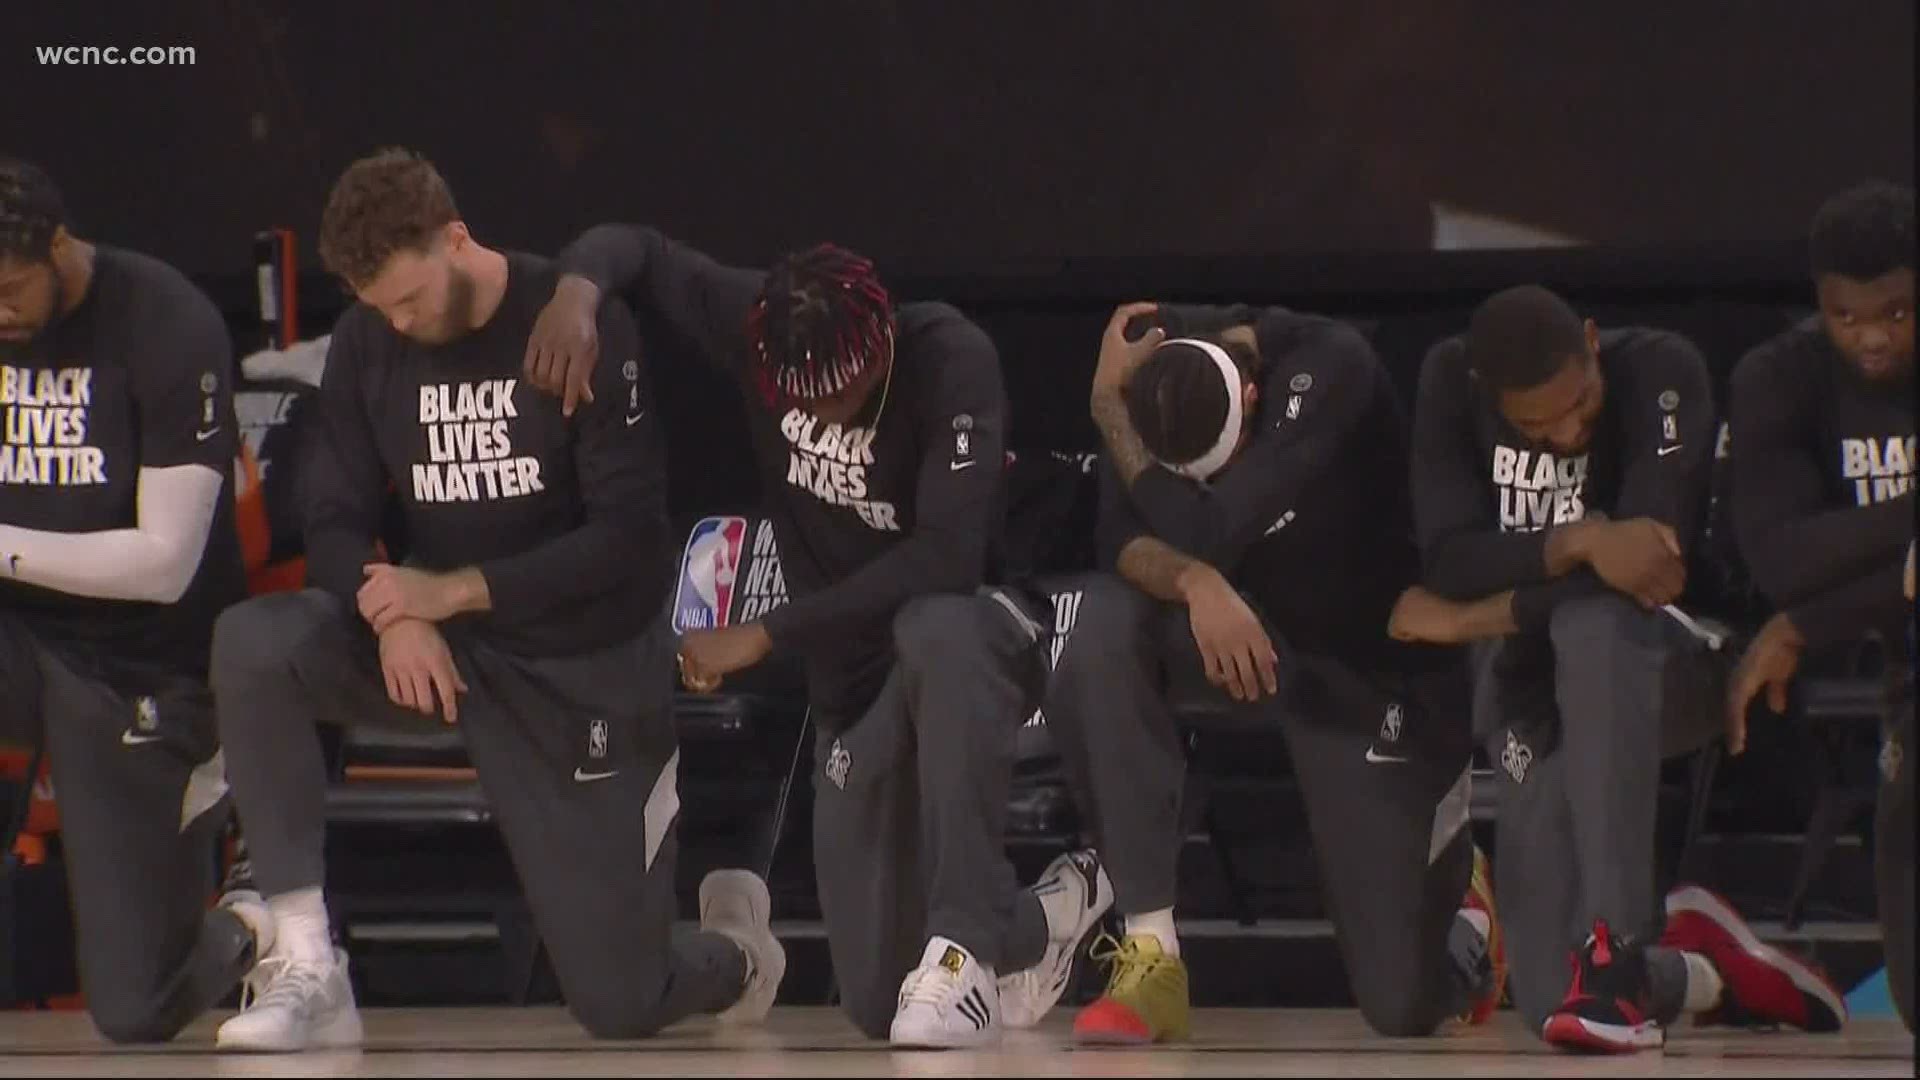 In the NBA's first meaningful game in months, all players and coaches on both teams knelt and locked arms in solidarity with Black Lives Matter.